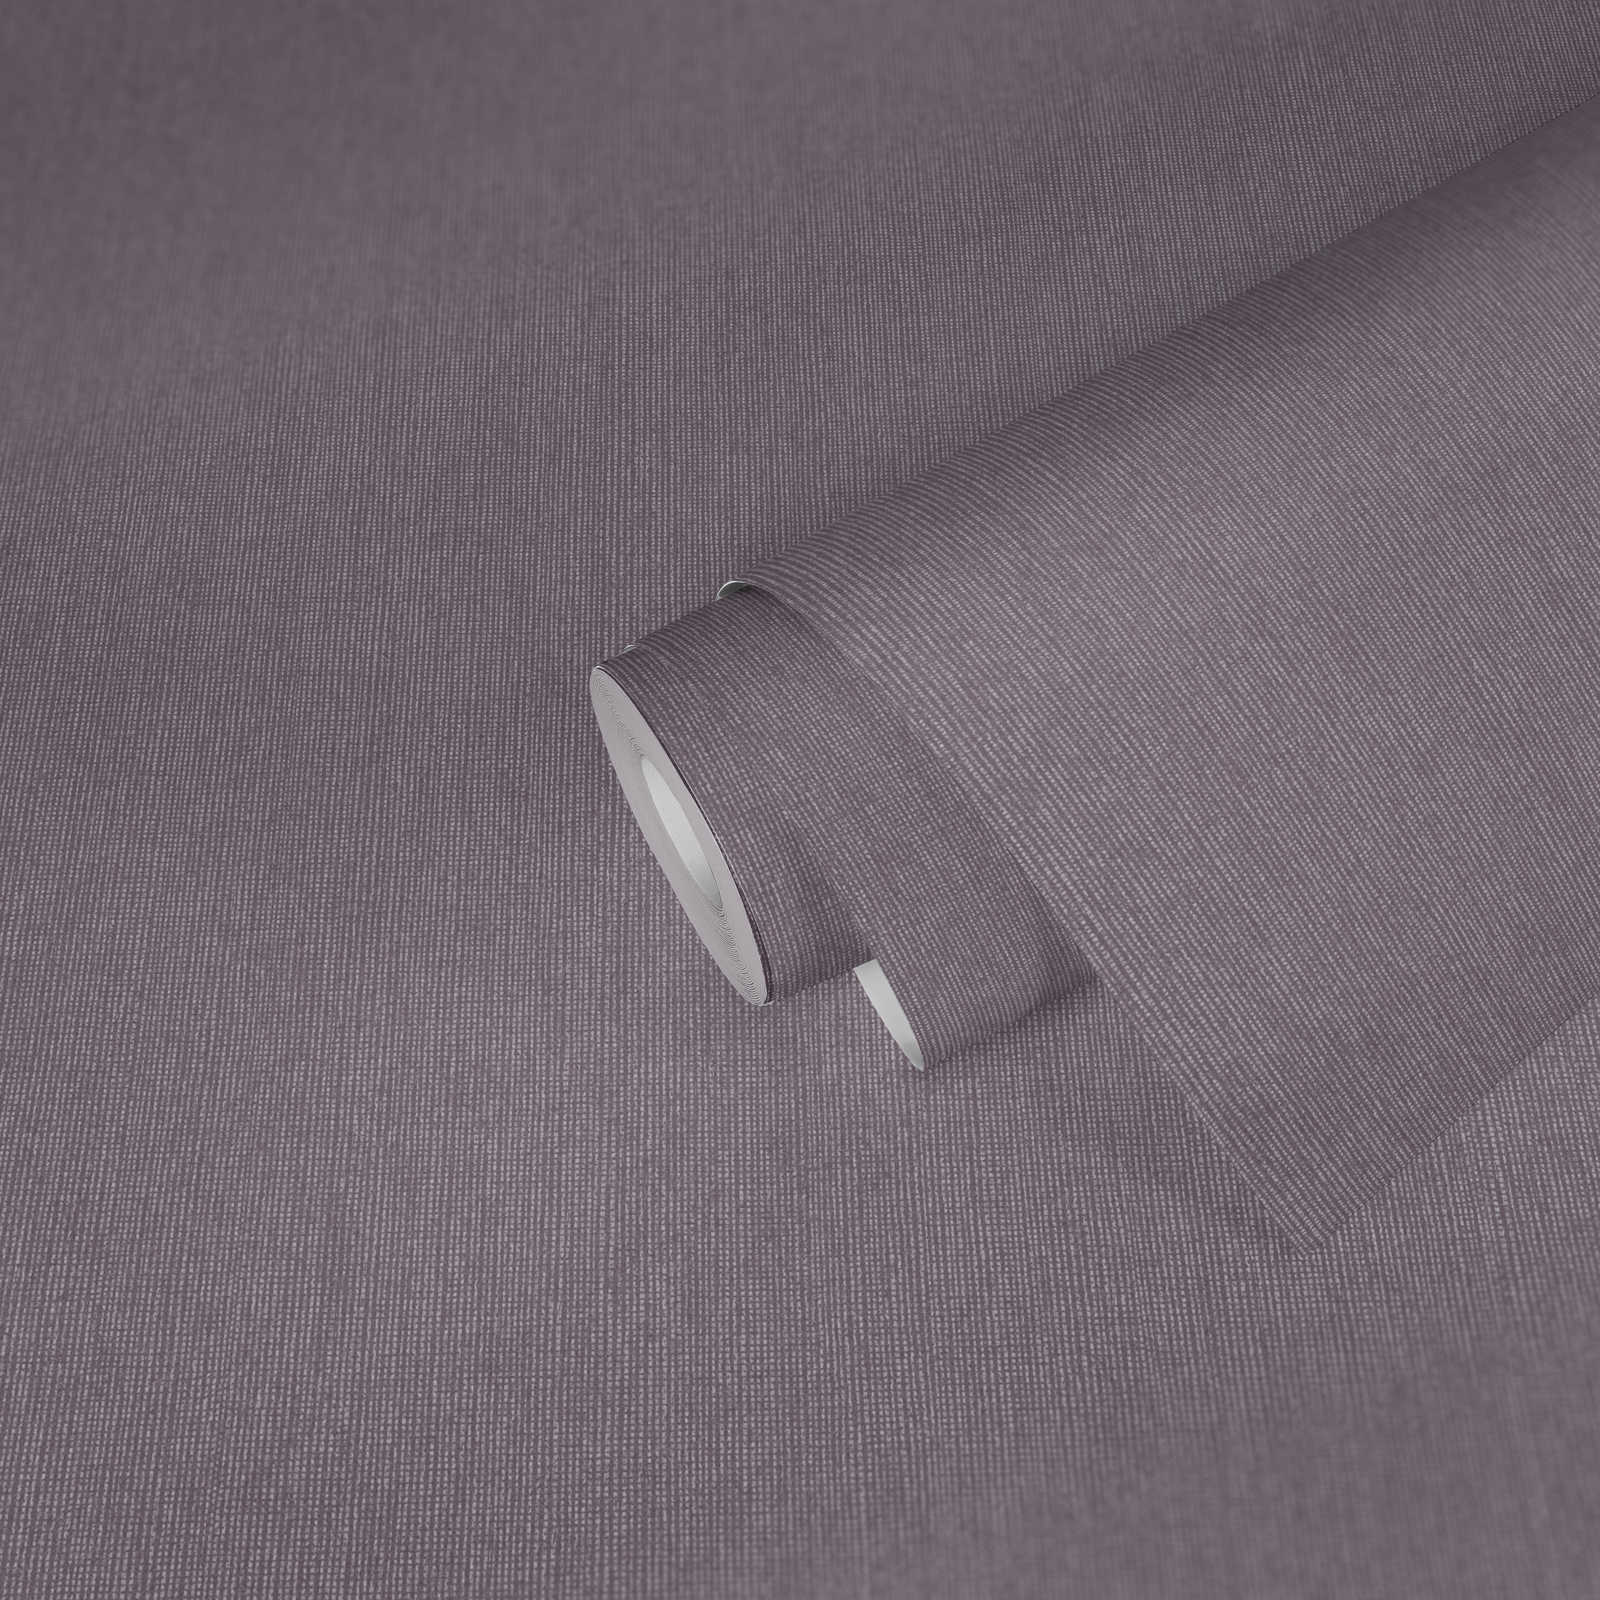             Gloss wallpaper with textile texture & shimmer effect - purple, grey
        